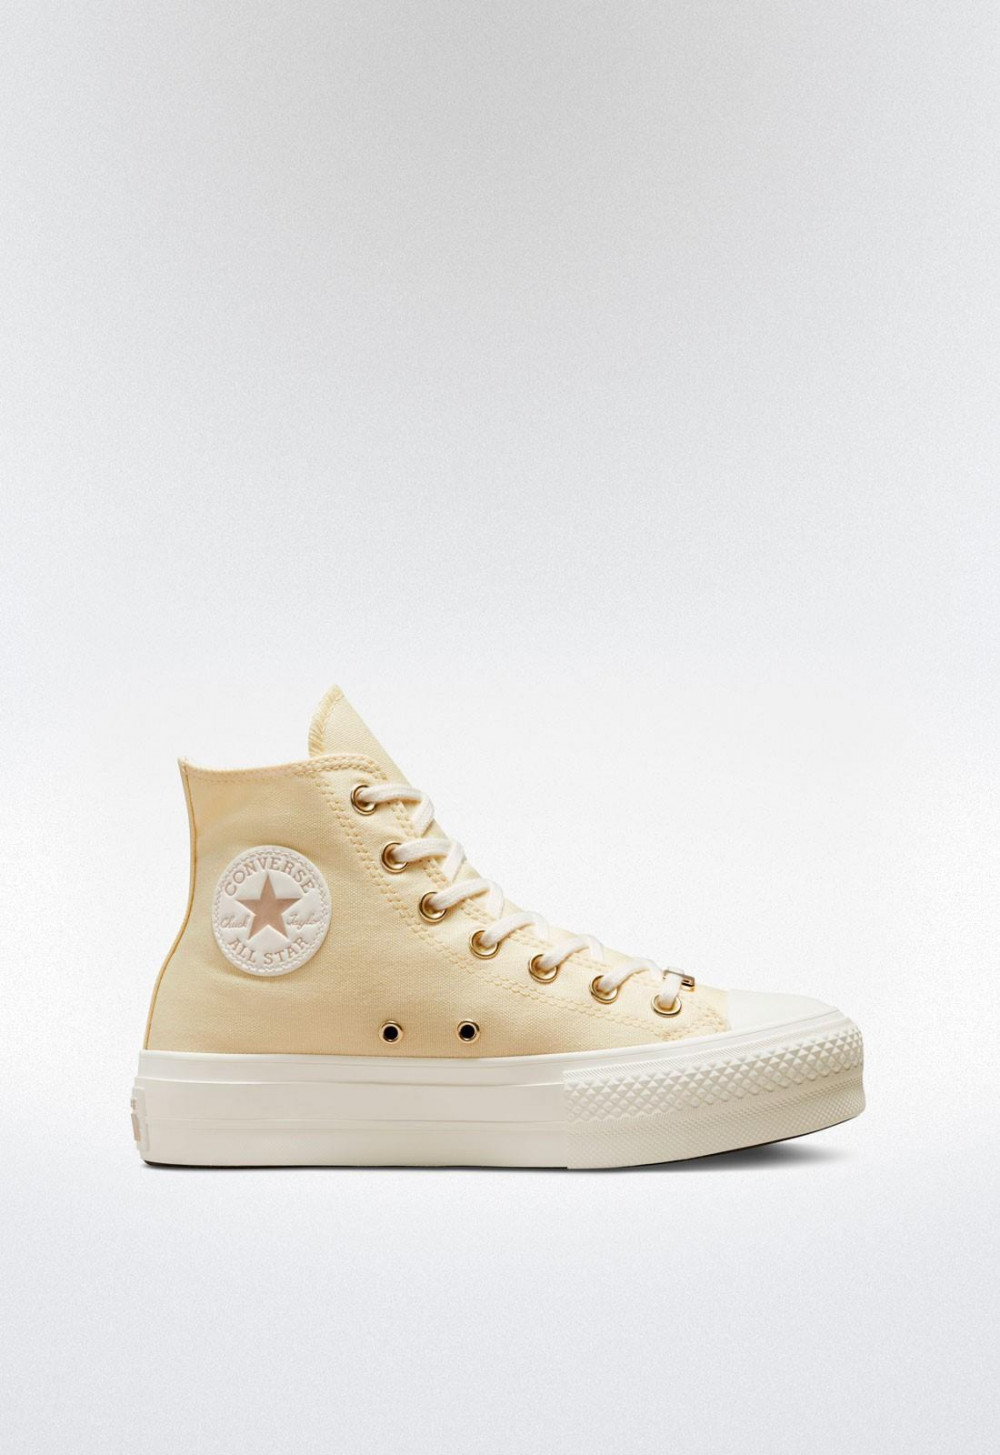 Ardiente Scully Disponible Deportivo de mujer beige Converse chuck taylor all star lift